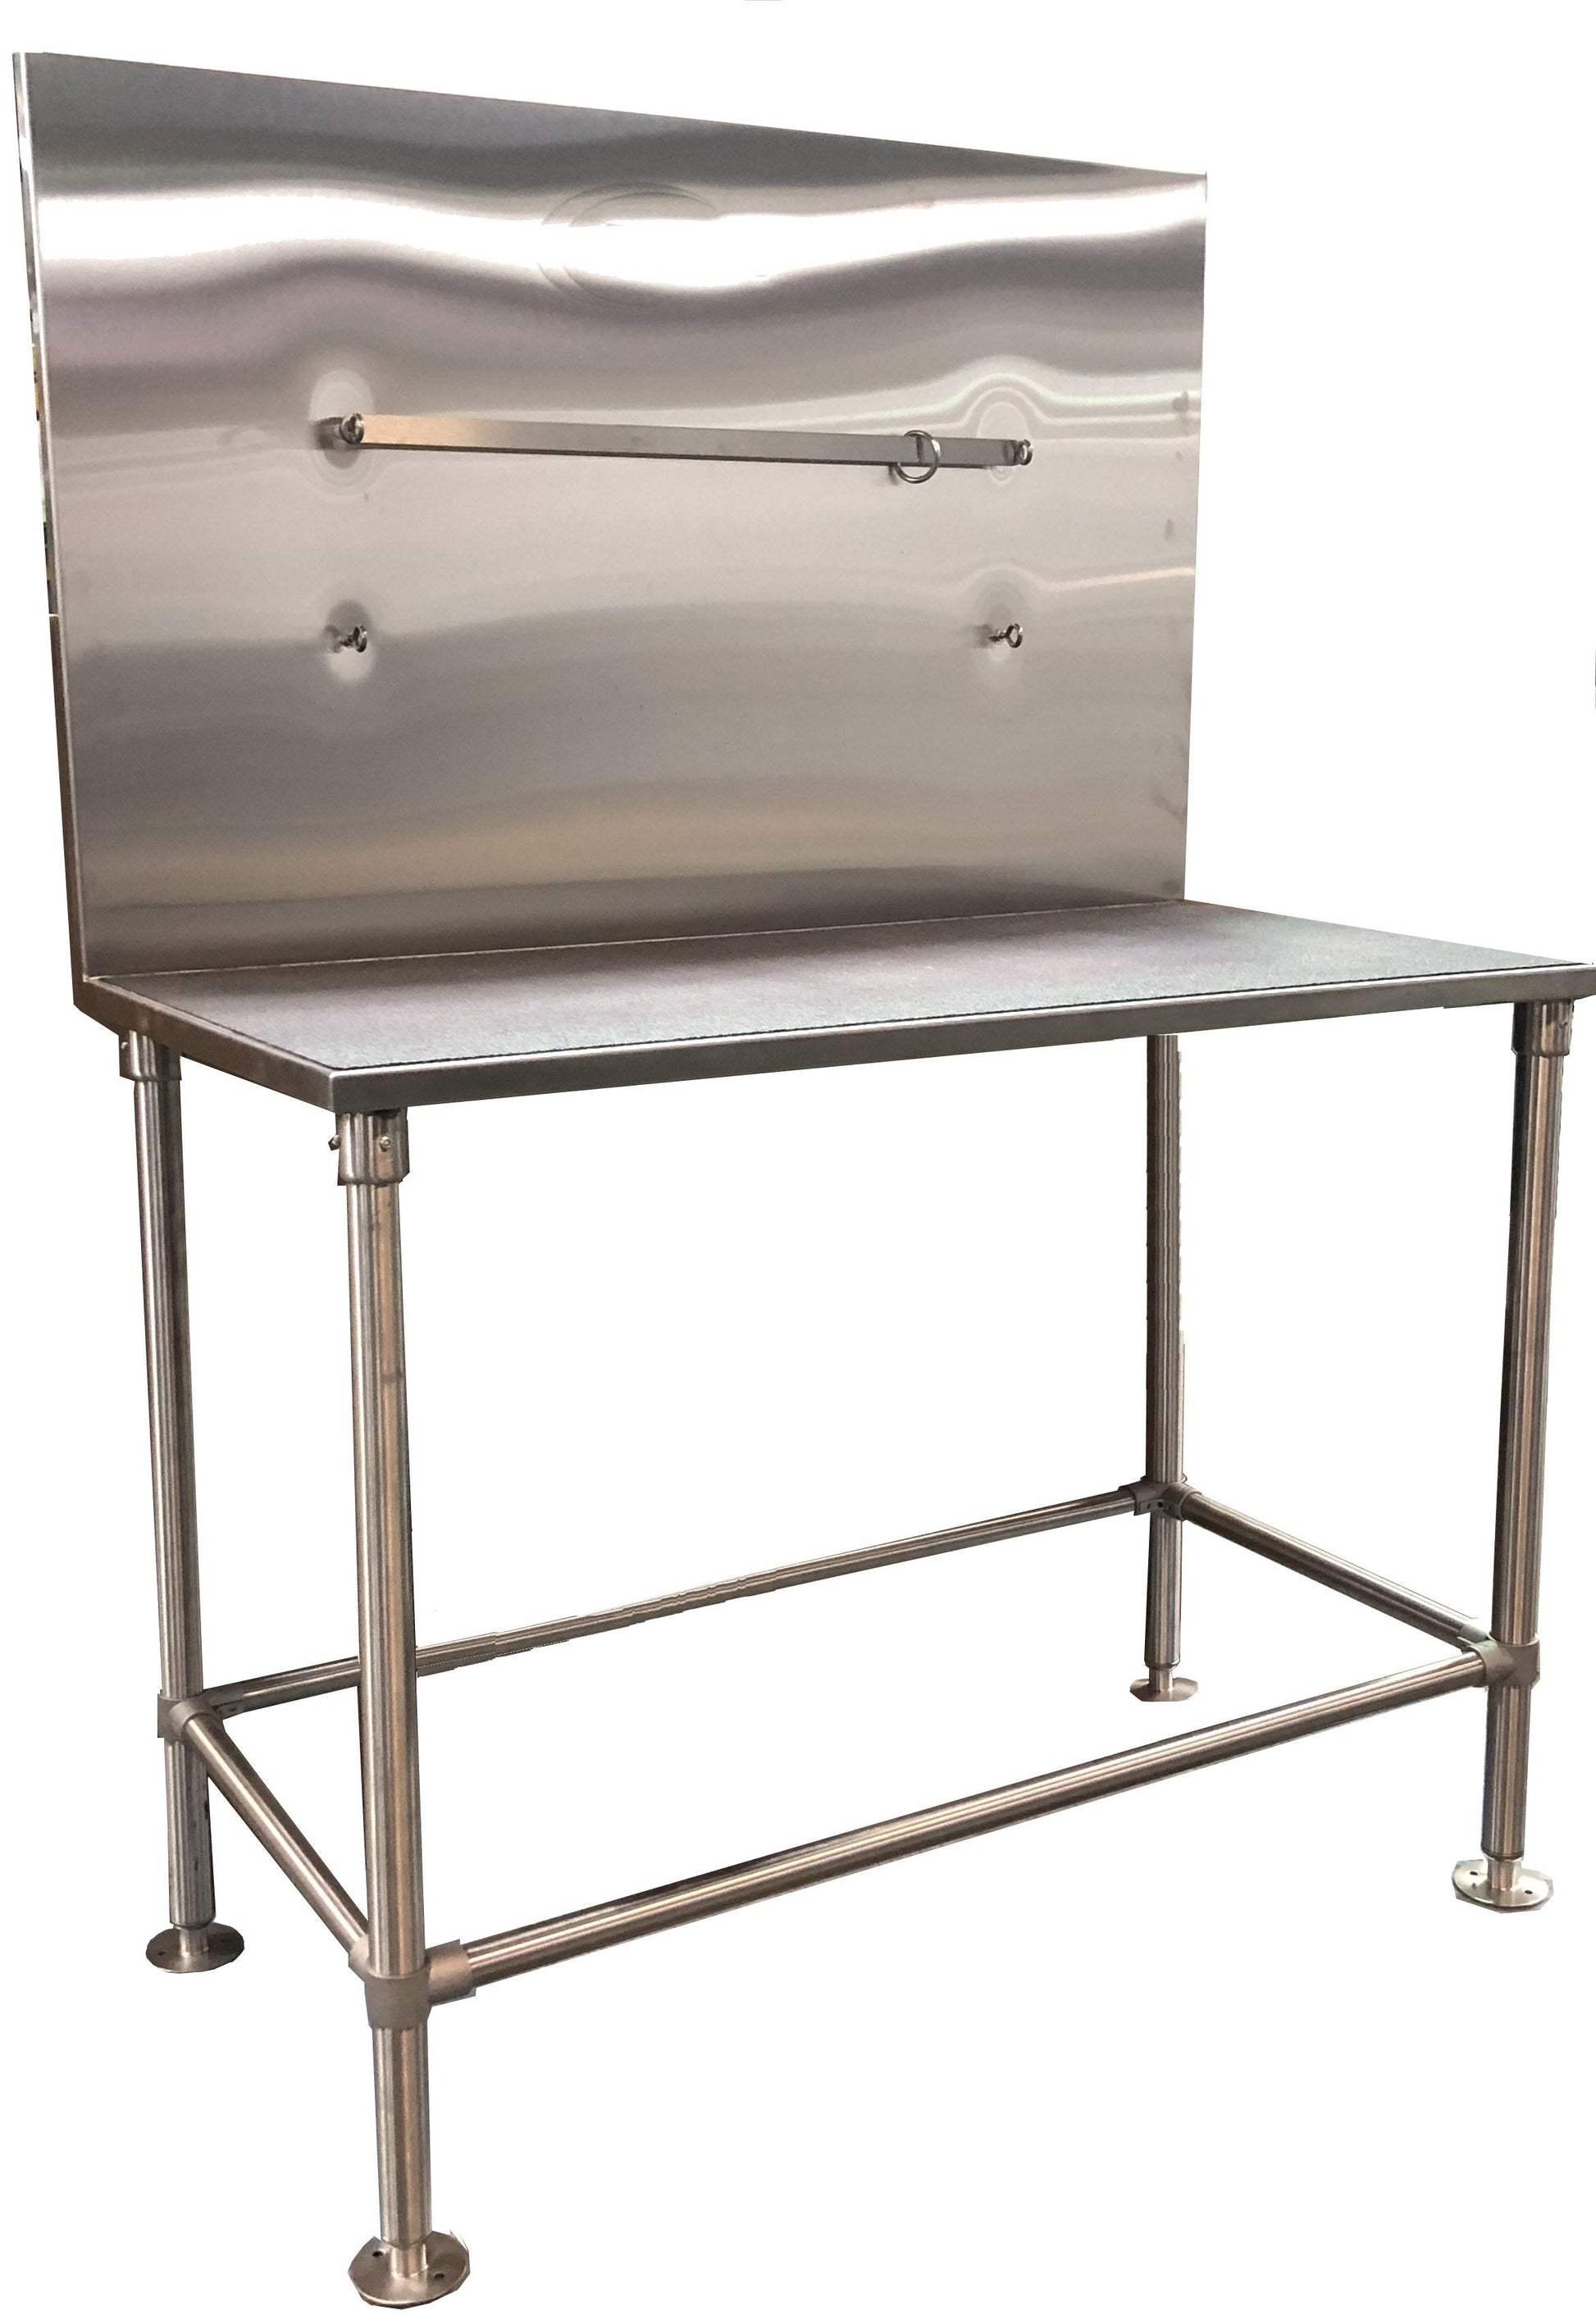 Stainless Steel Grooming Drying Table-Grooming Tables-Pet's Choice Supply